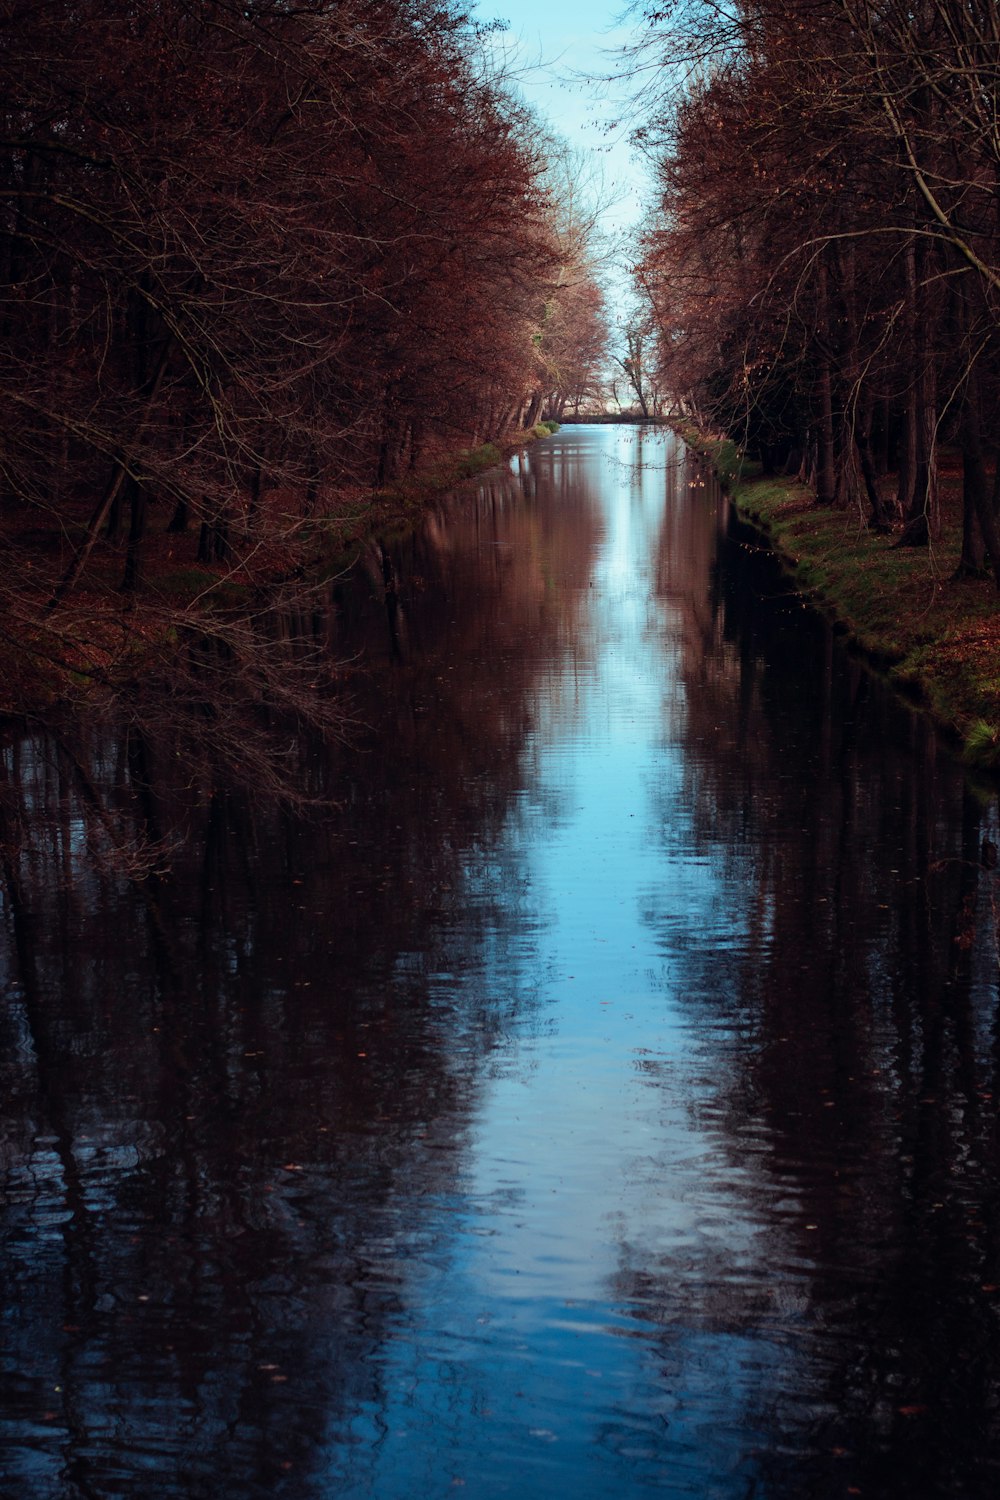 a narrow waterway with trees lining both sides